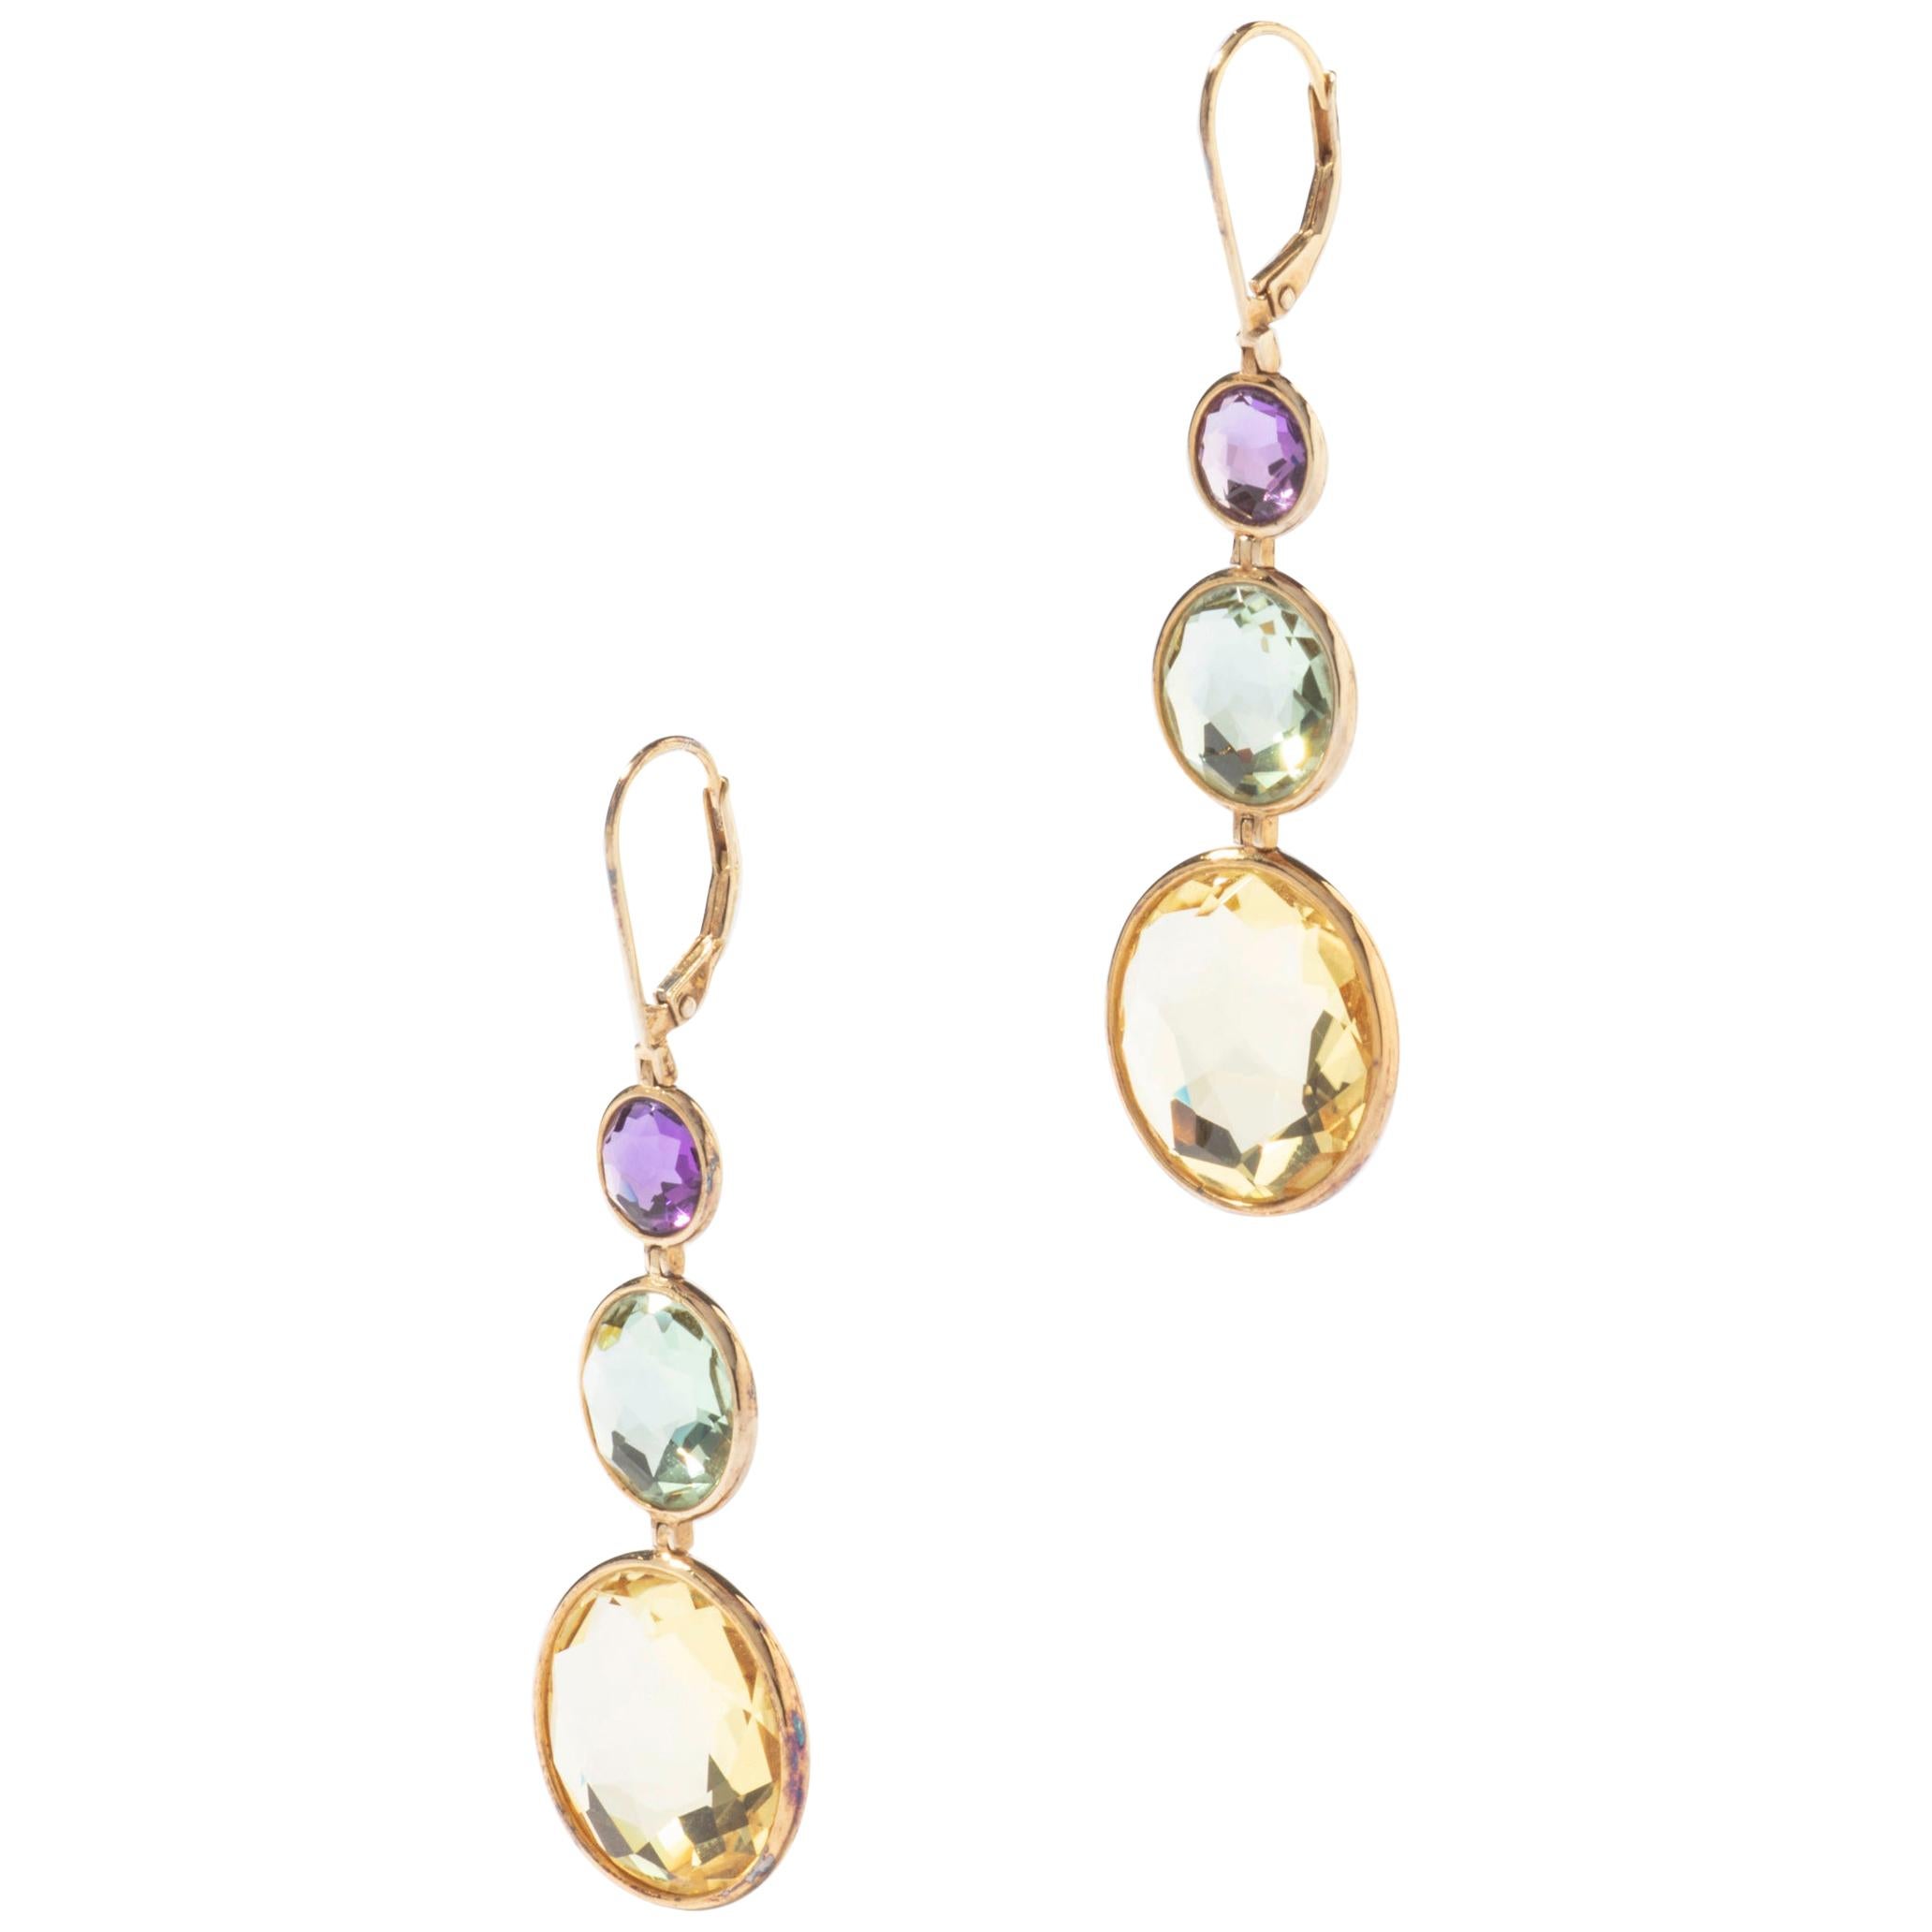 Citrine, Amethyst and AquaMarine Rose cut double side on Yellow Gold 18k Earrings Ear Pendants.

Total height: 2.36 inch (6.00 centimeter).
Width at maximum: 0.79 inch (2.00 centimeter).
Total weight: 9.96 grams.